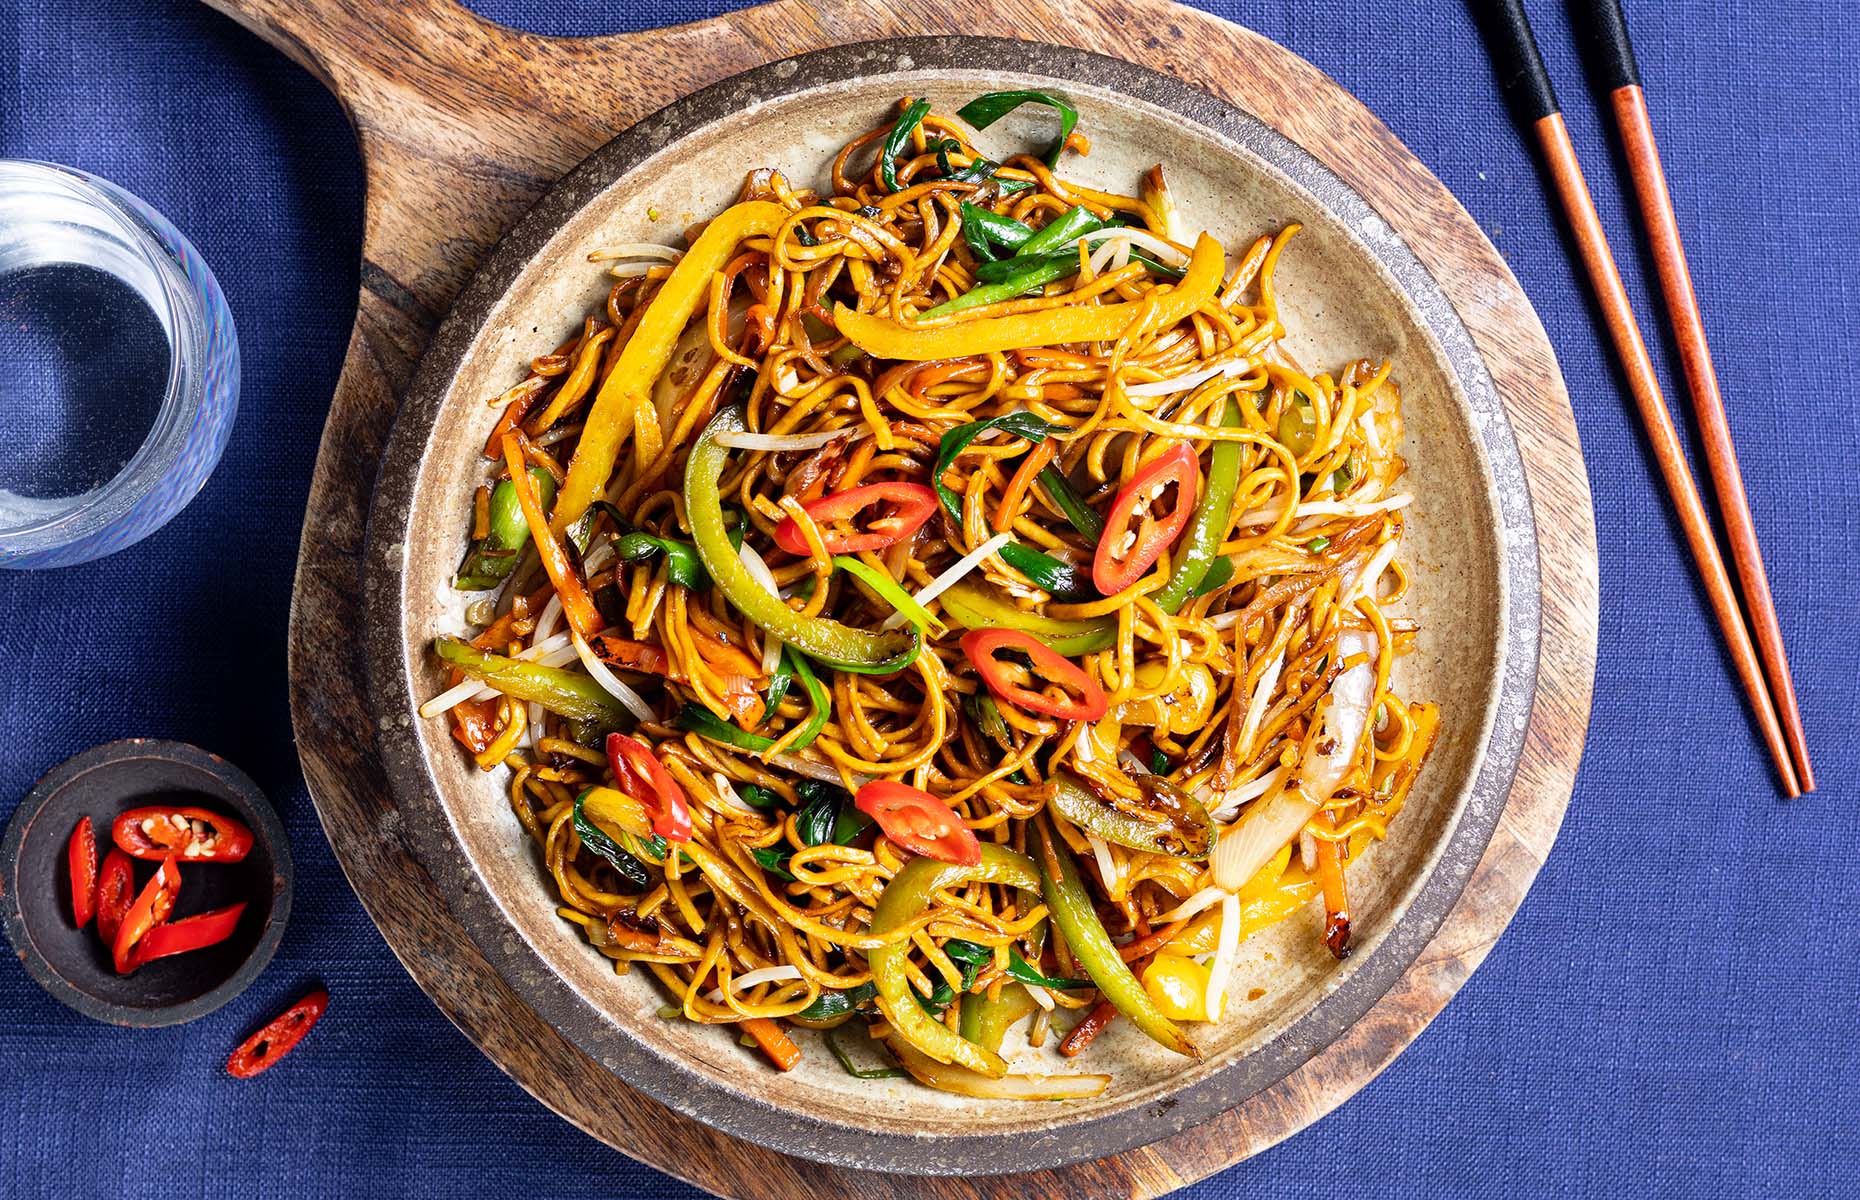 Learn how to cook an Asian-inspired feast (Image: School of Wok)